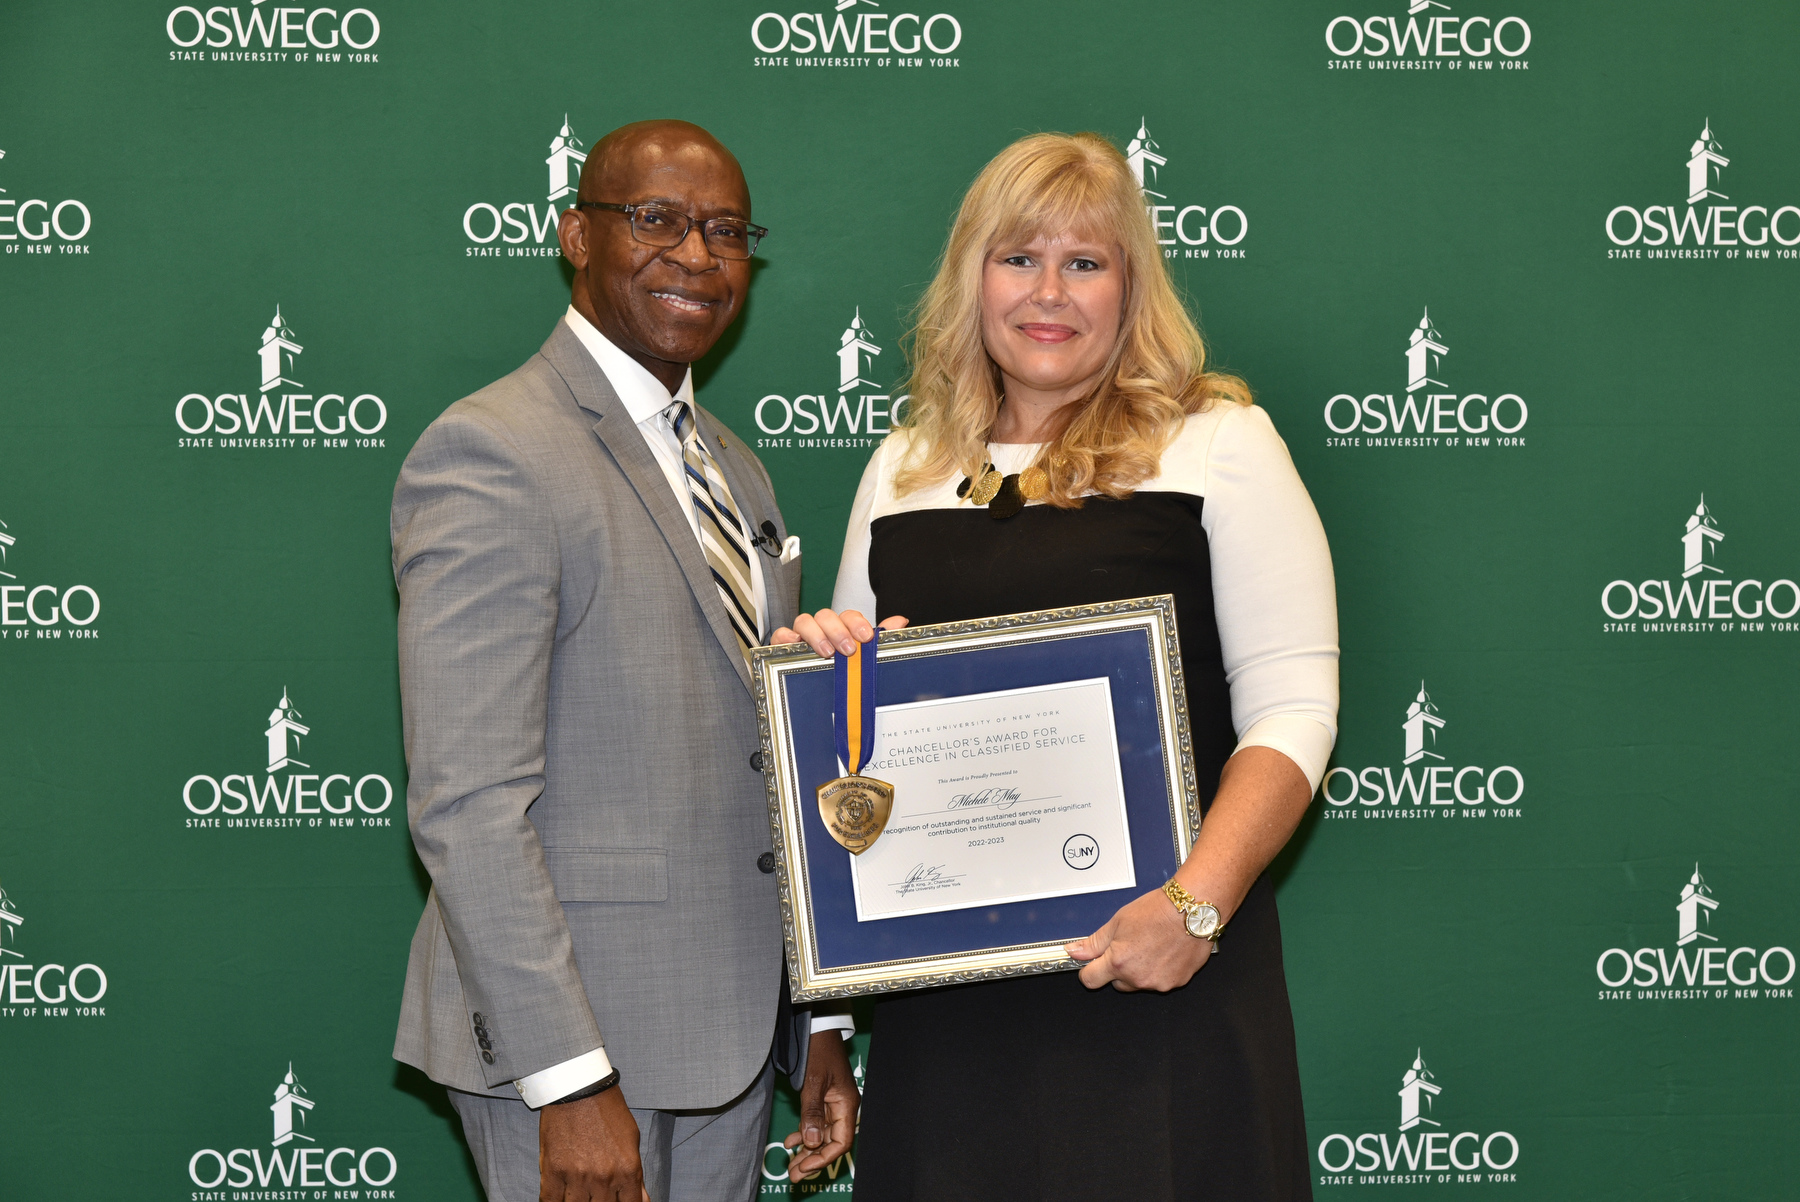 The SUNY Chancellor's Award for Excellence in Classified Service was officially presented to Michele May by President Peter O. Nwosu during the Opening Breakfast.